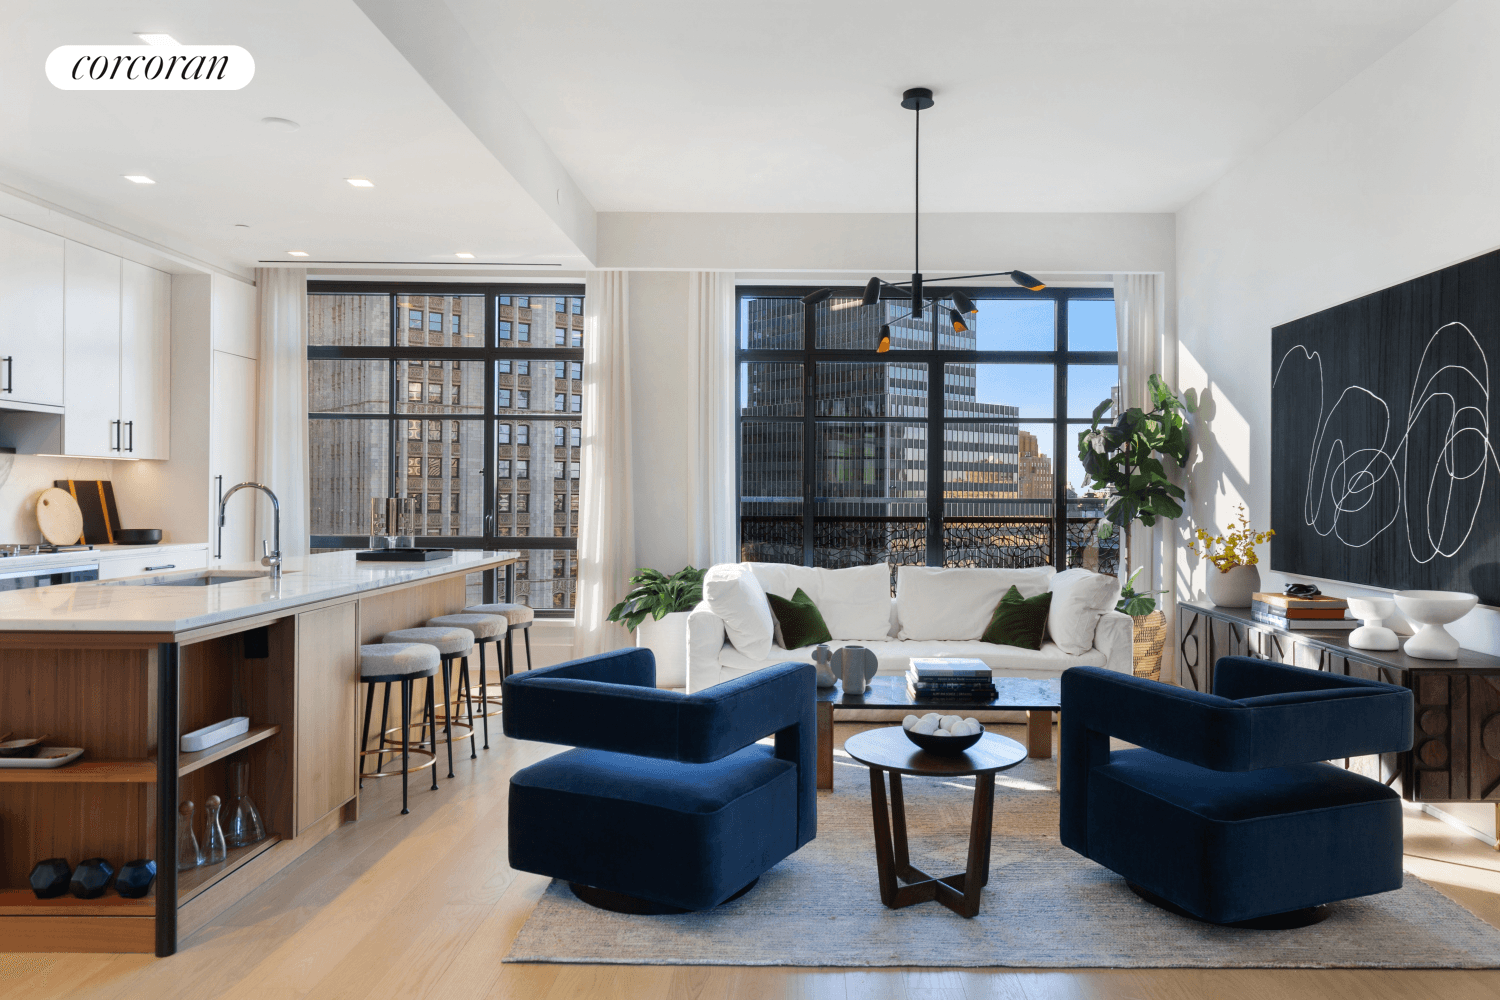 NOW 97 SOLD FINAL OPPORTUNITYThis 2, 075 SF three bedroom, three and a half bath residence offers a dramatic double exposure living and dining room including sweeping views of historic ...